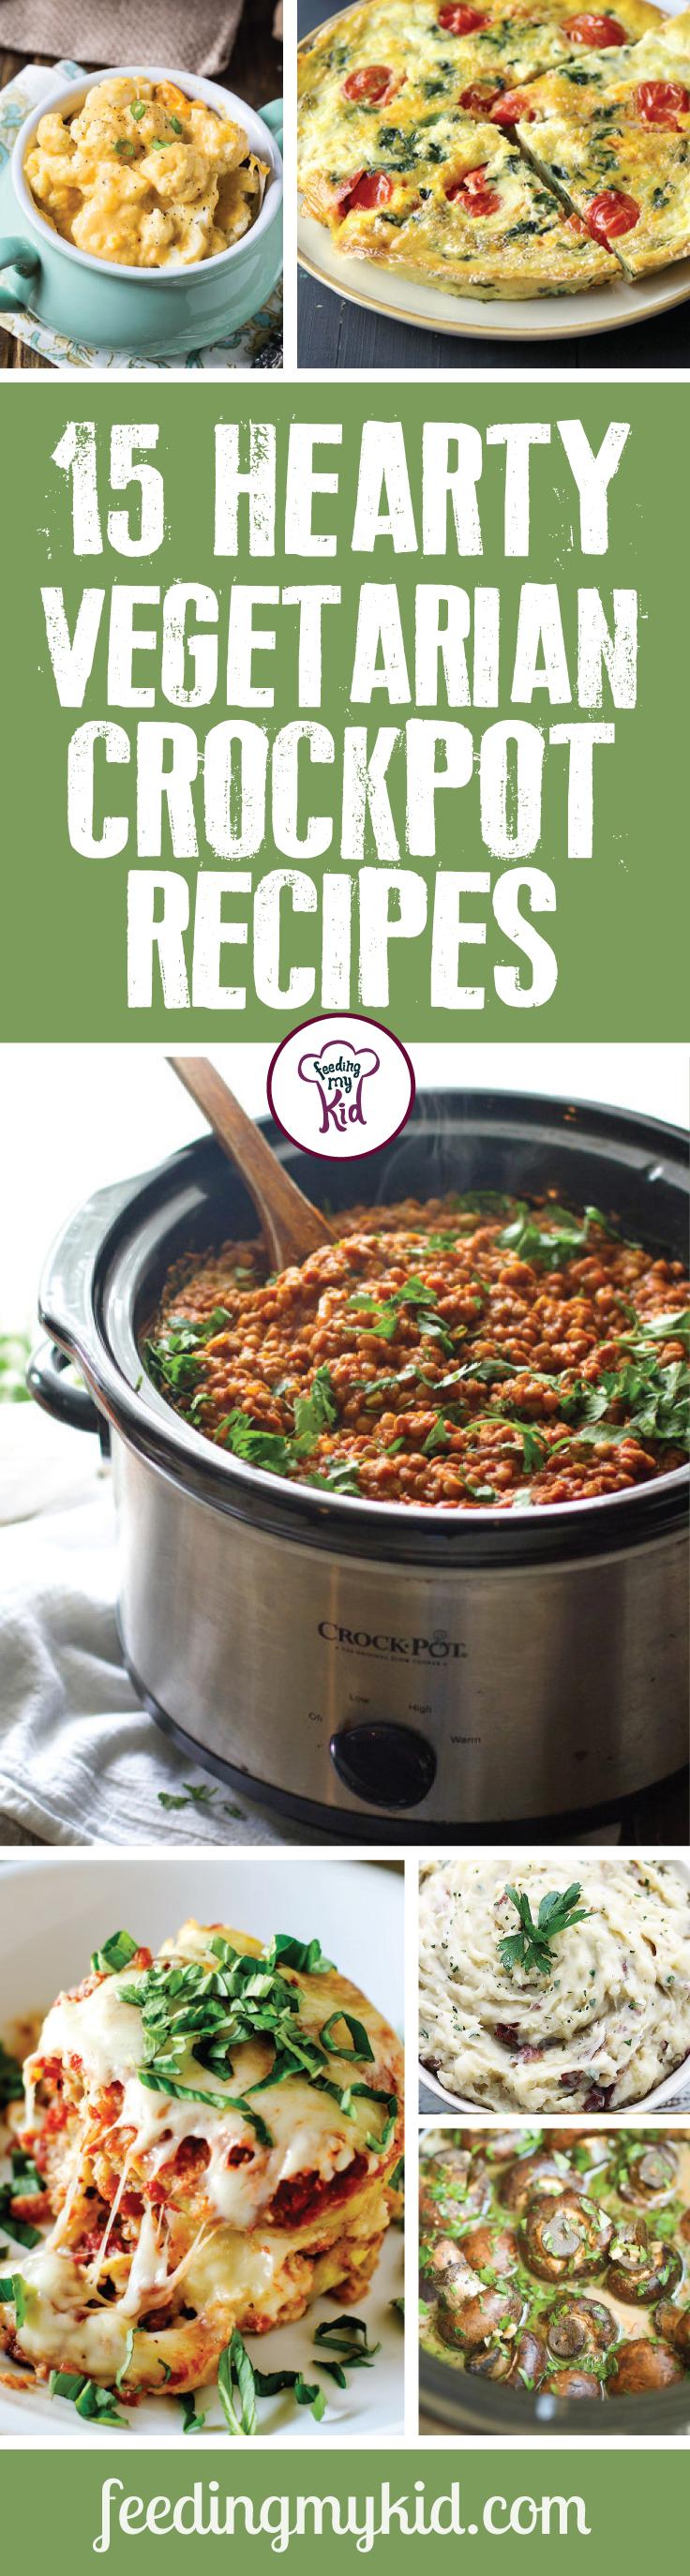 Vegetarian Crockpot Recipes - These are a must pin! Share these amazing vegetarian recipes with the whole family! 15 Hearty Vegetarian Crockpot Recipes - From crockpot cauliflower and cheese to eggplant parmesan; kids and grownups alike will love these recipes! #fmk #recipes #crockpot